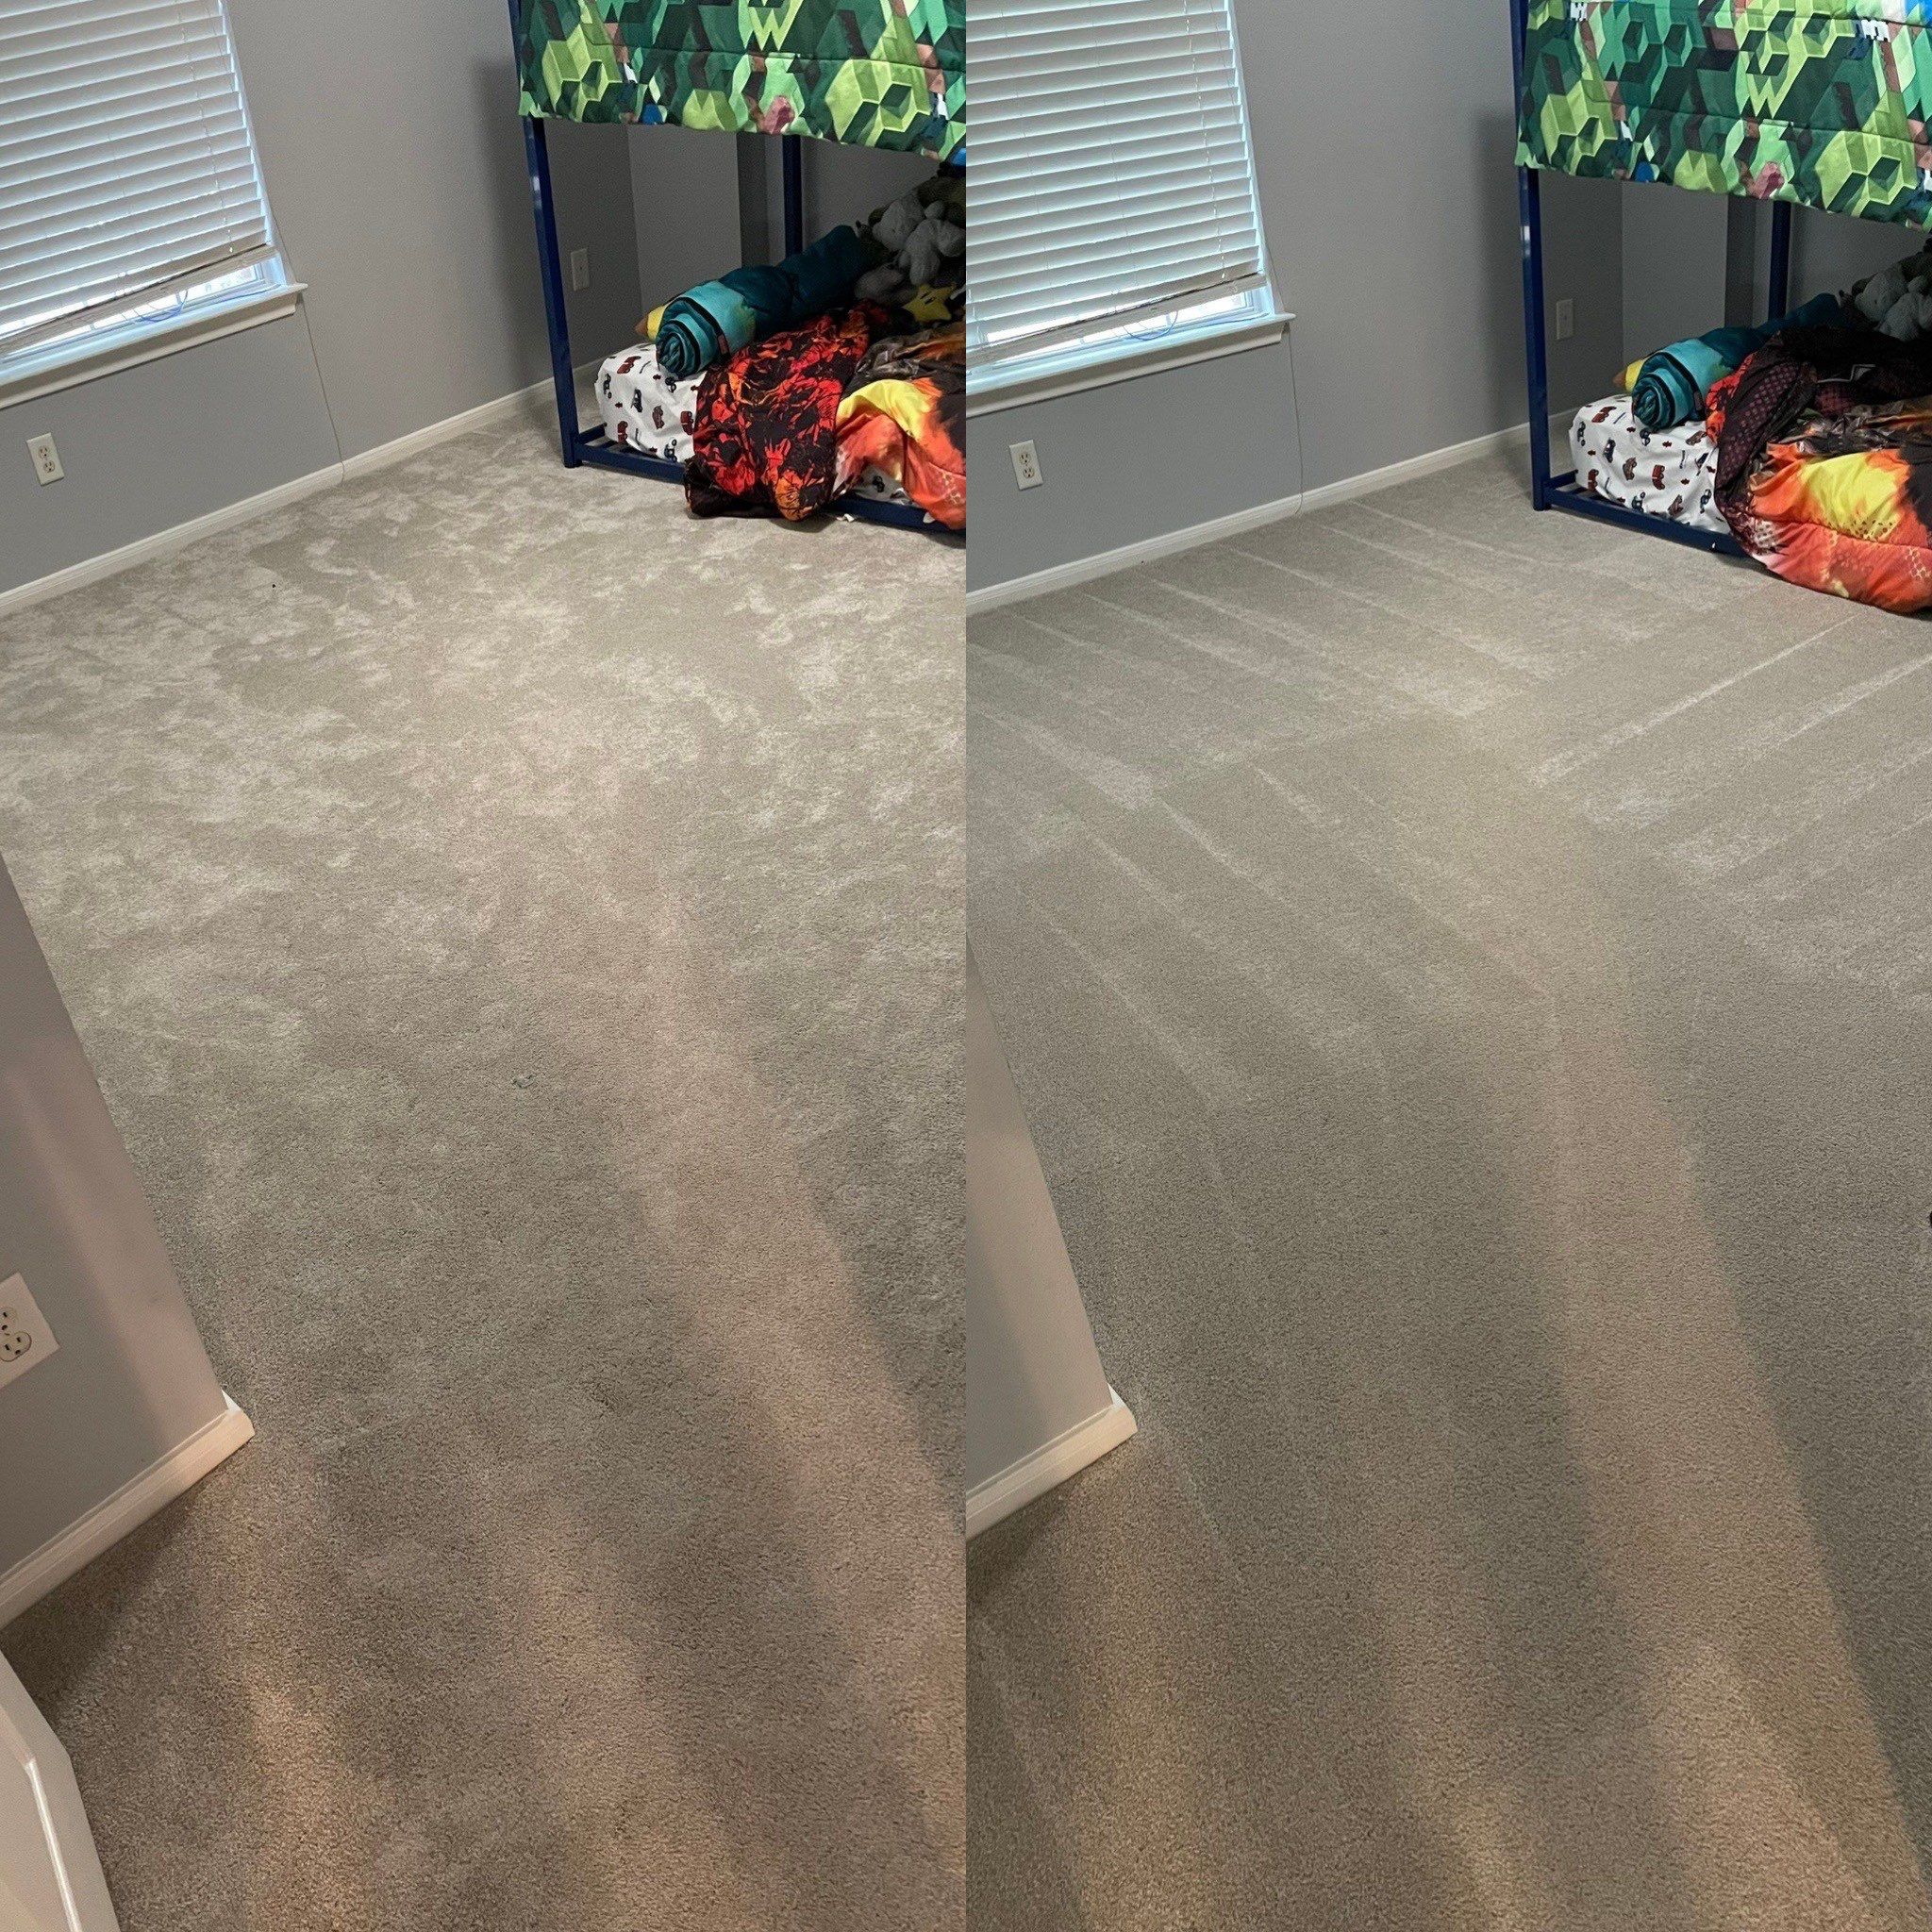 carpet cleaning before and after dirt removal and fibers refreshed